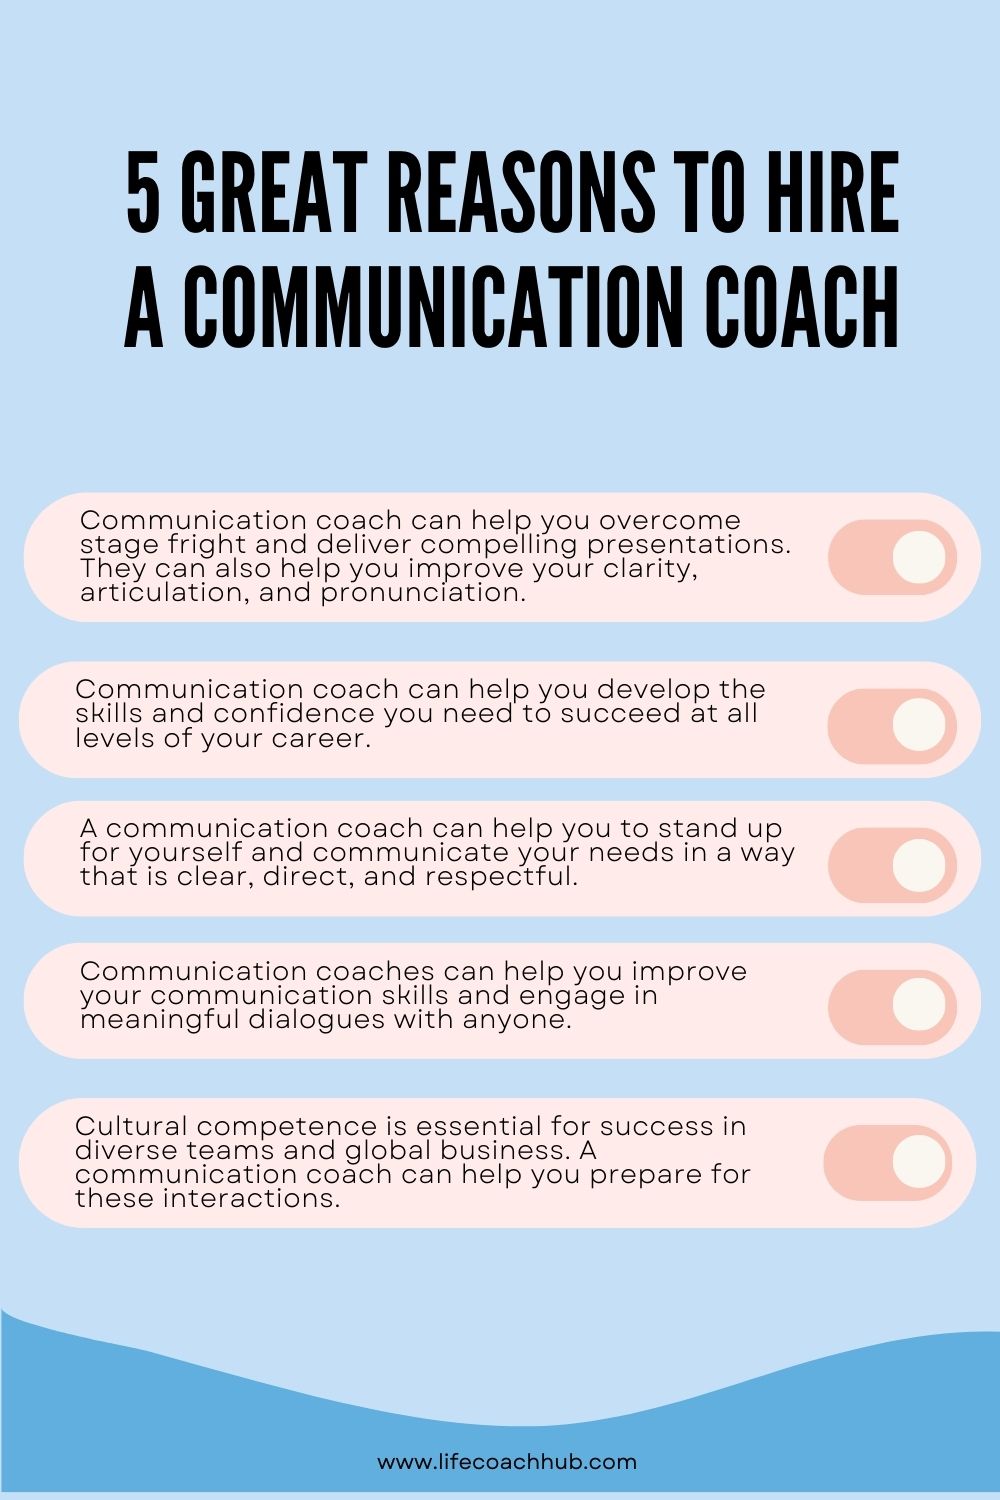 5 great reasons to hire a communication coach